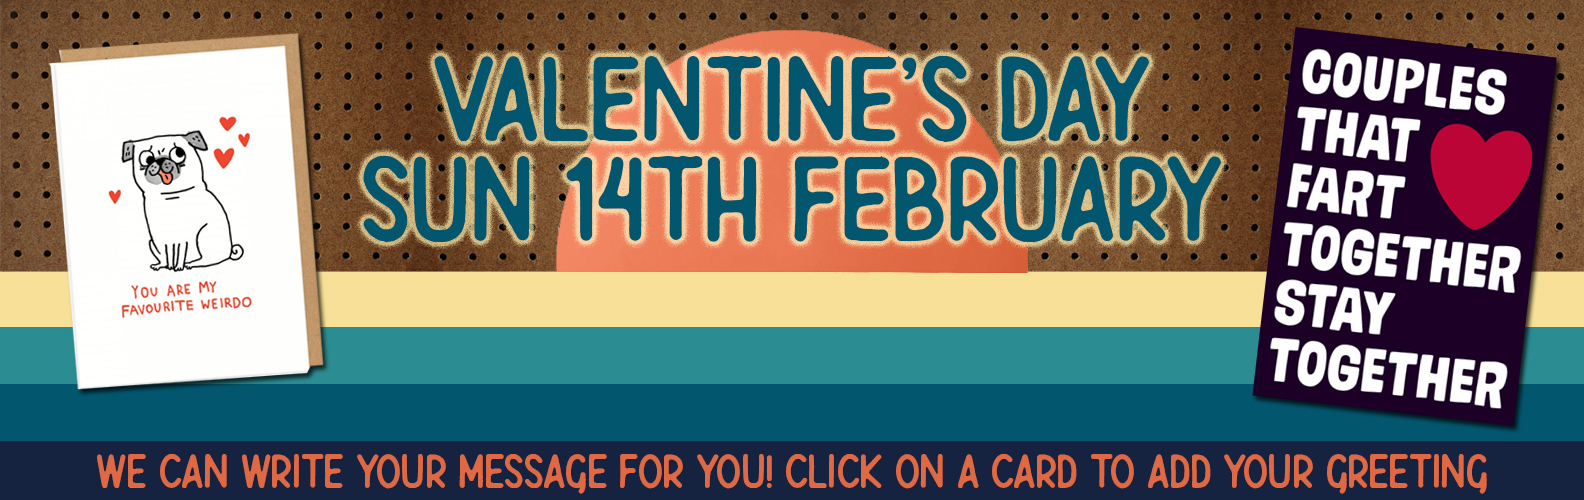 Valentine's Day 14th February